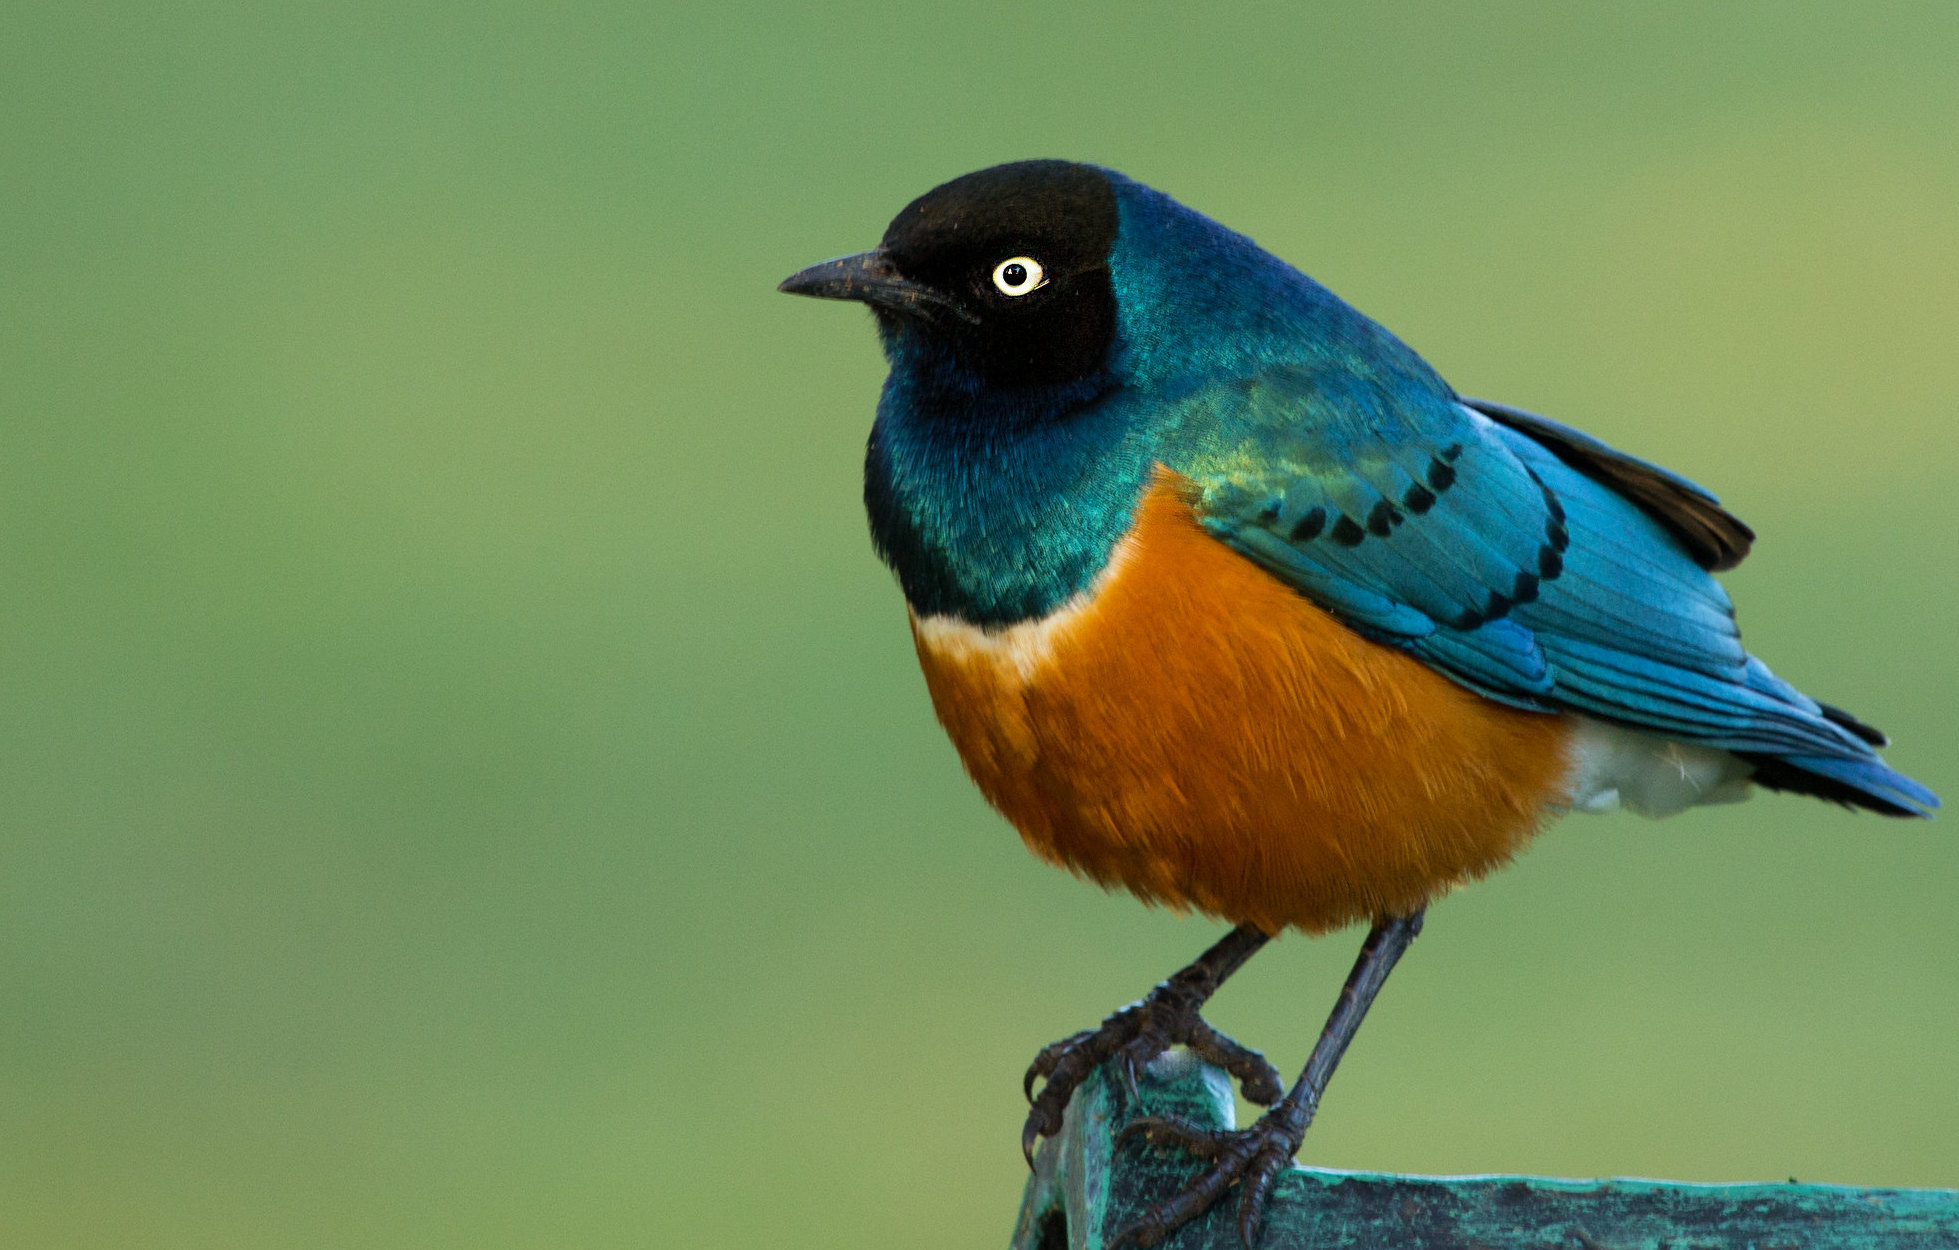 A Superb Starling up close, looking to the left